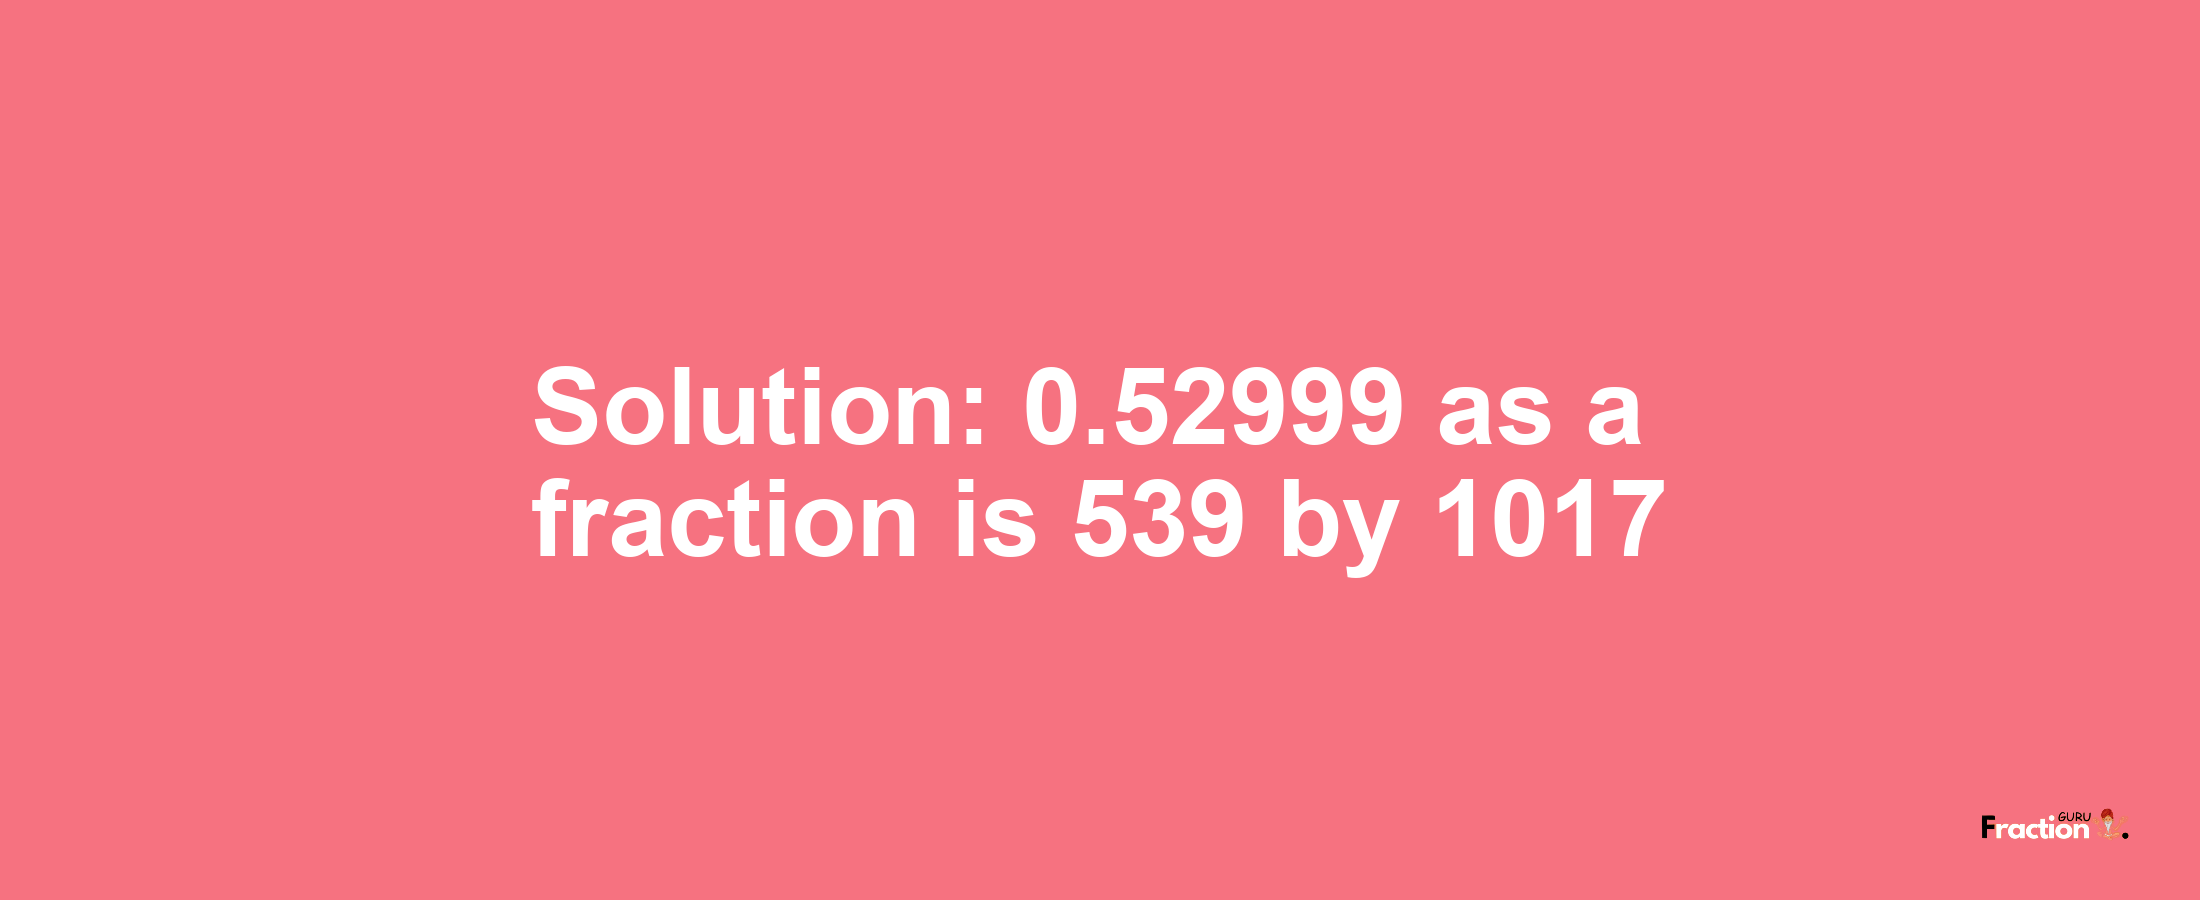 Solution:0.52999 as a fraction is 539/1017